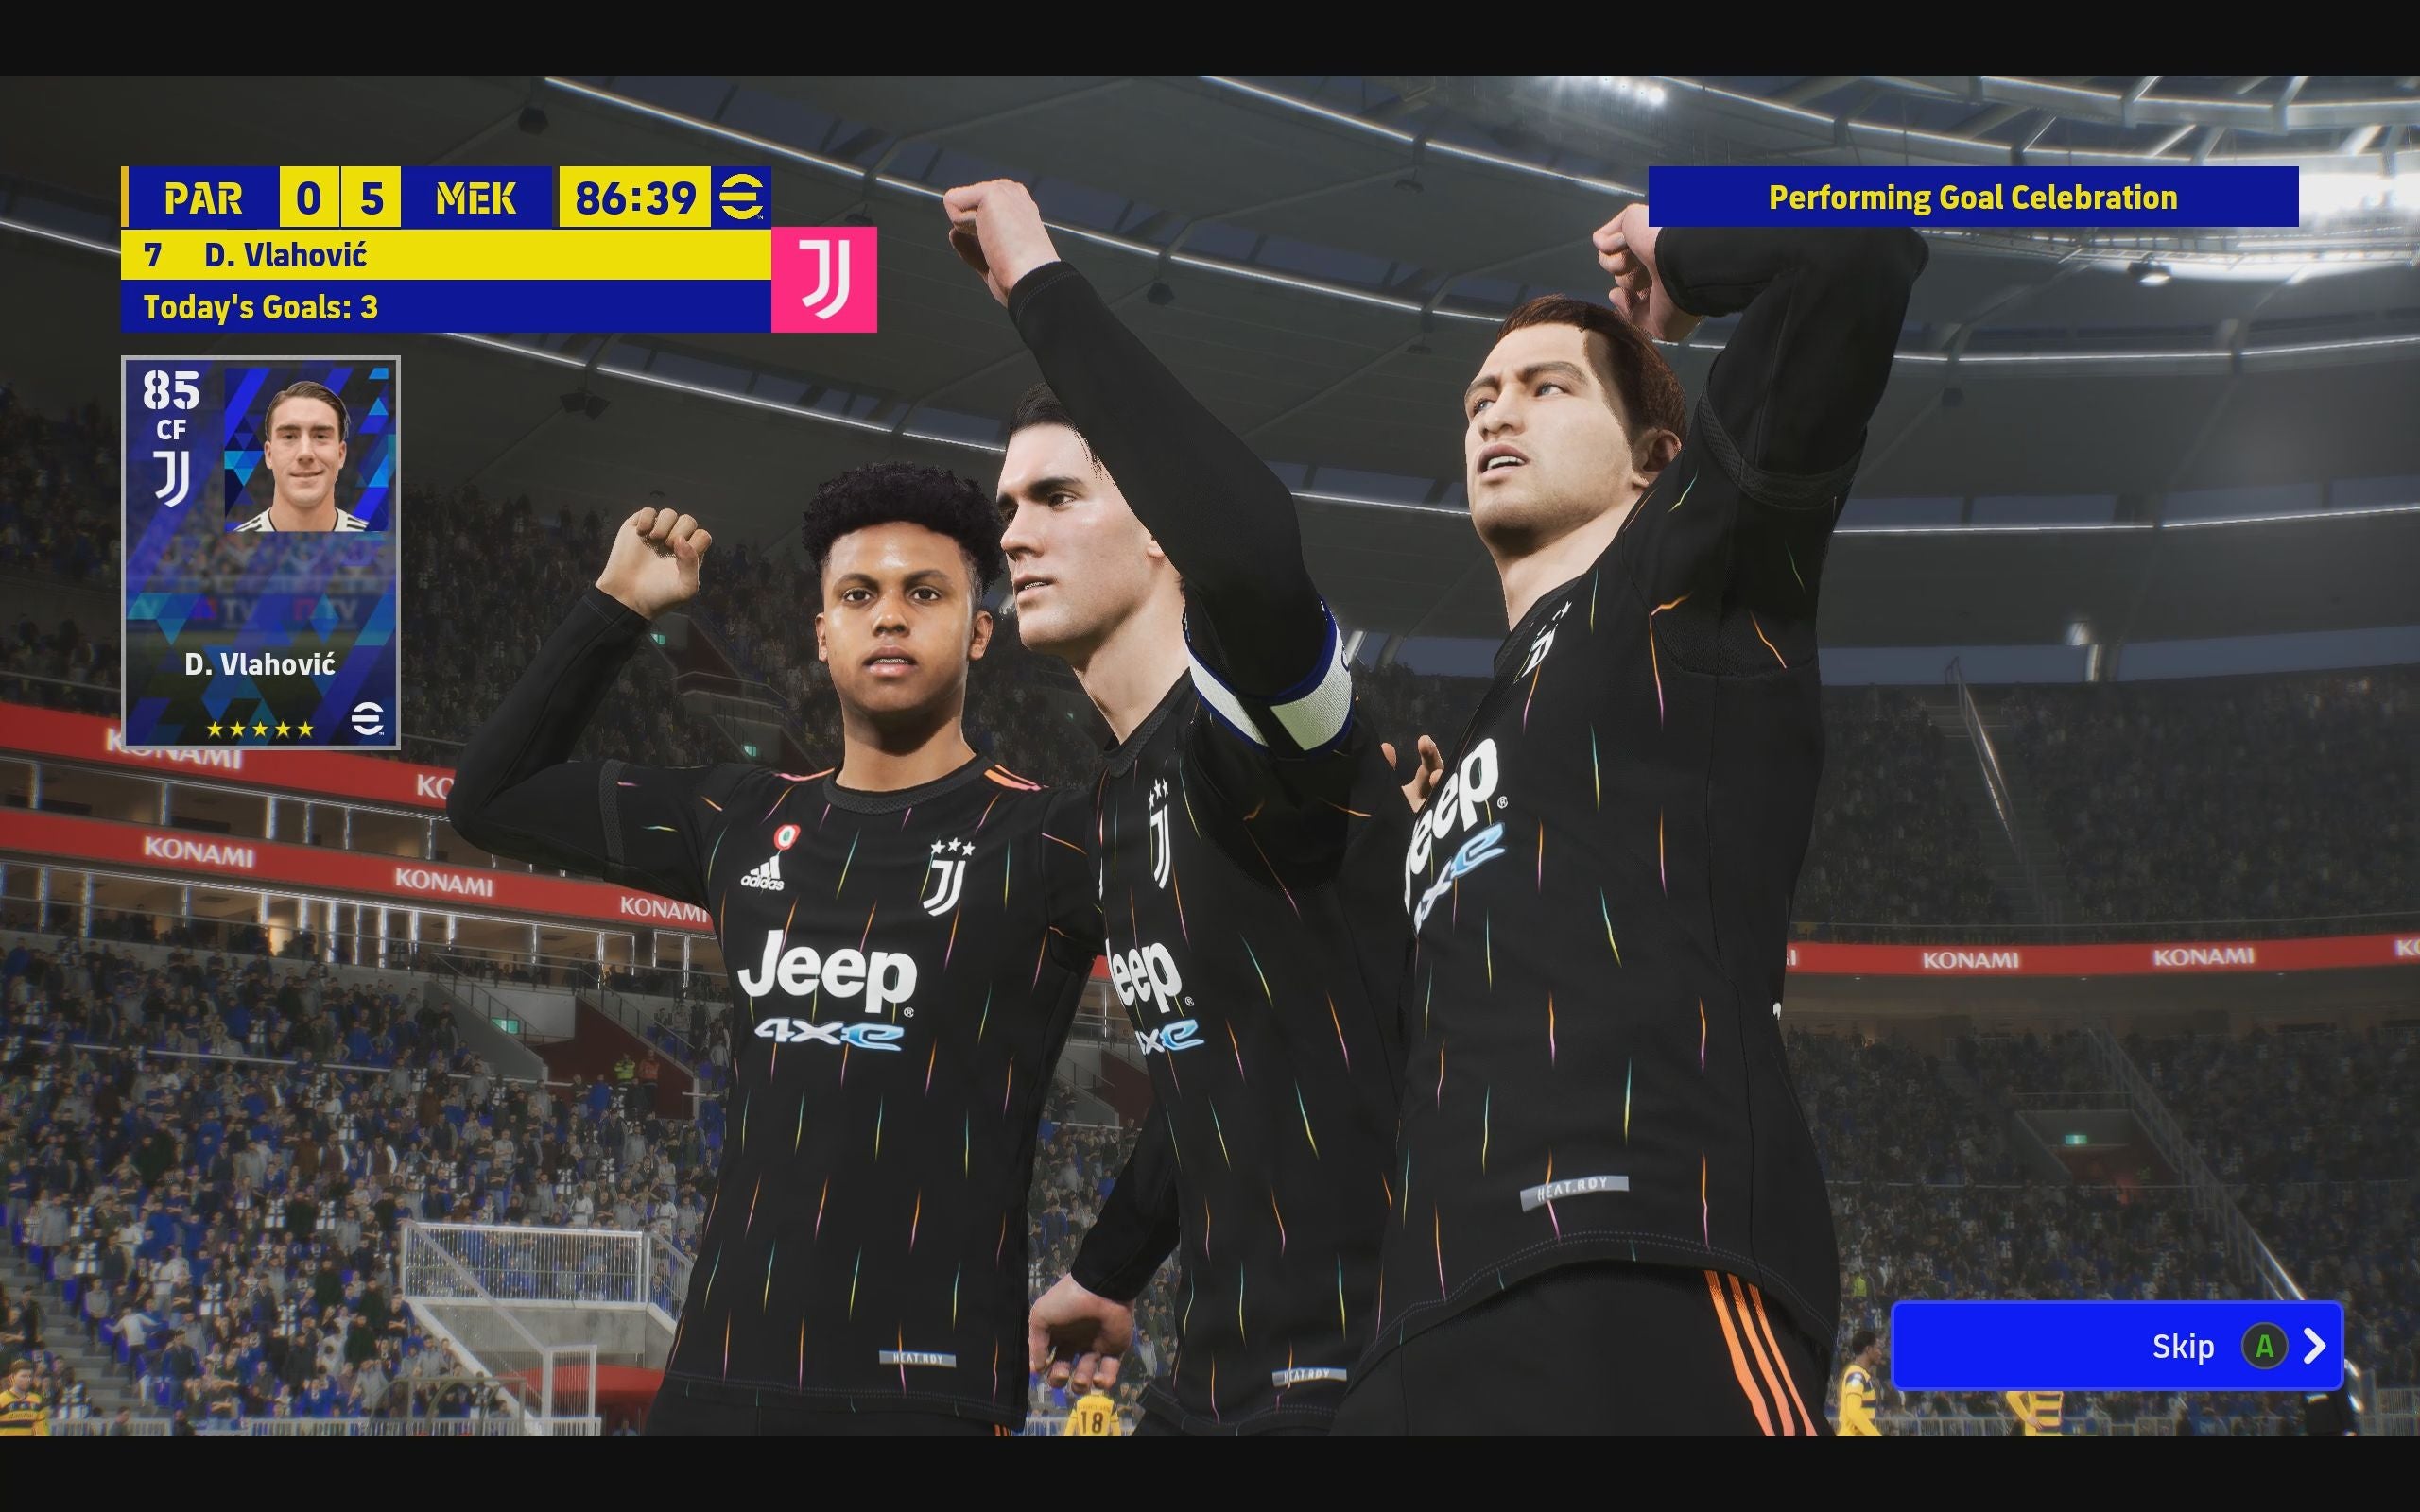 eFootball review: Three players in all-black Juventus kits celebrate Dusan Vlahovic's third goal in an 87th-minute 5-0 win.